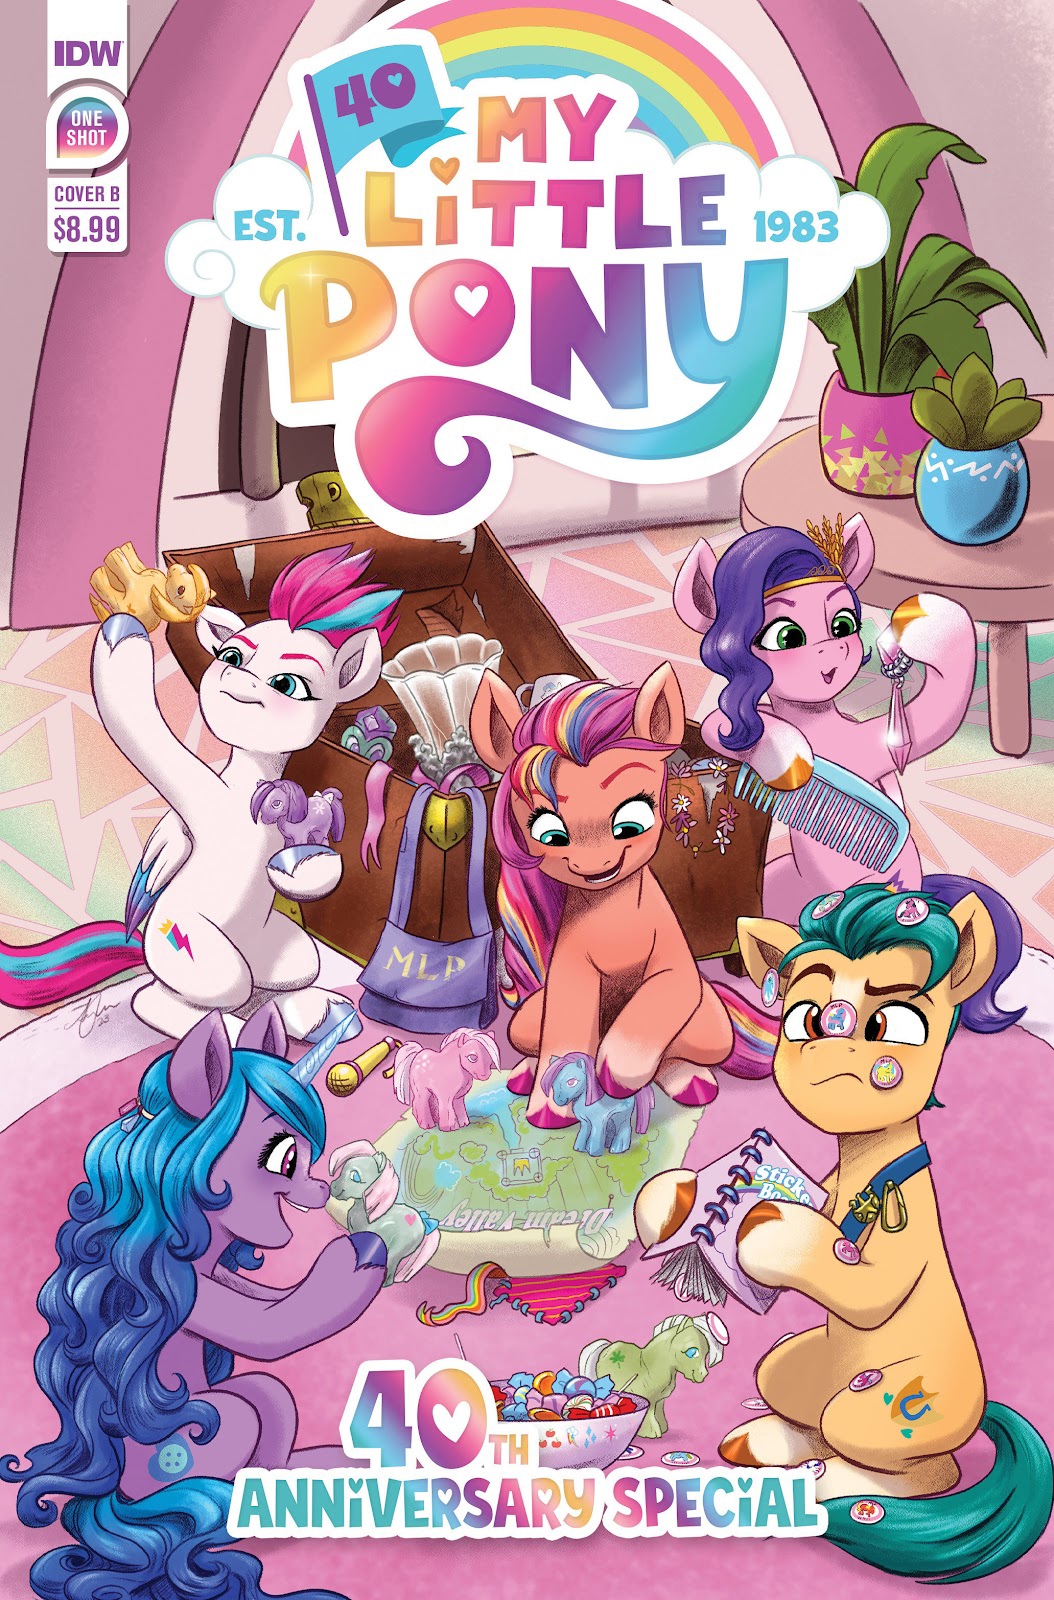 My Little Pony 40th Anniversary CelebrationThe Deluxe Edition comic